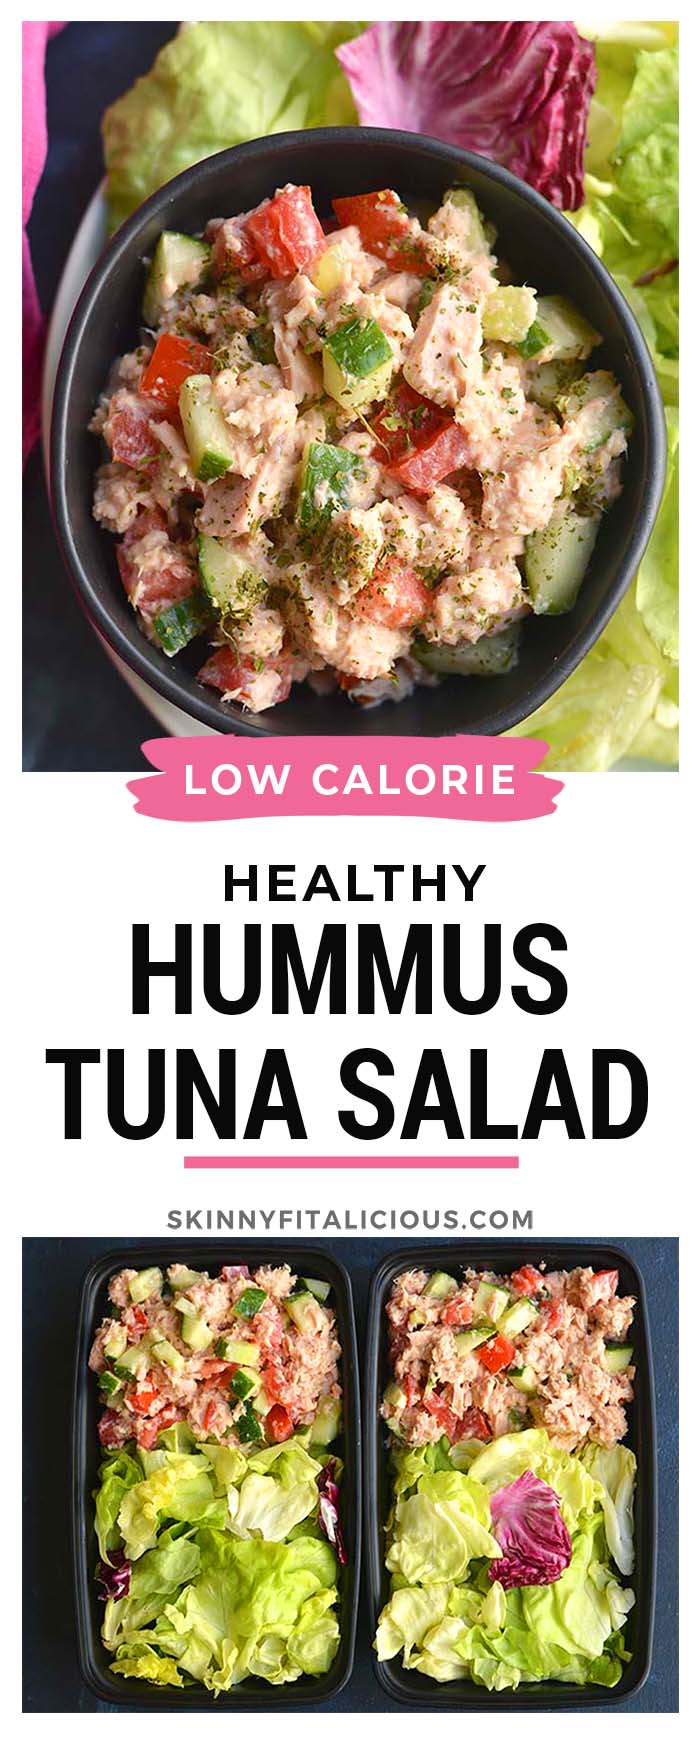 Meal Prep Hummus Tuna Salad ready in 10 minutes! This high protein, low carb tuna salad is mixed with fresh veggies for a light and filling meal. Quick to prep, easy to eat on the go!